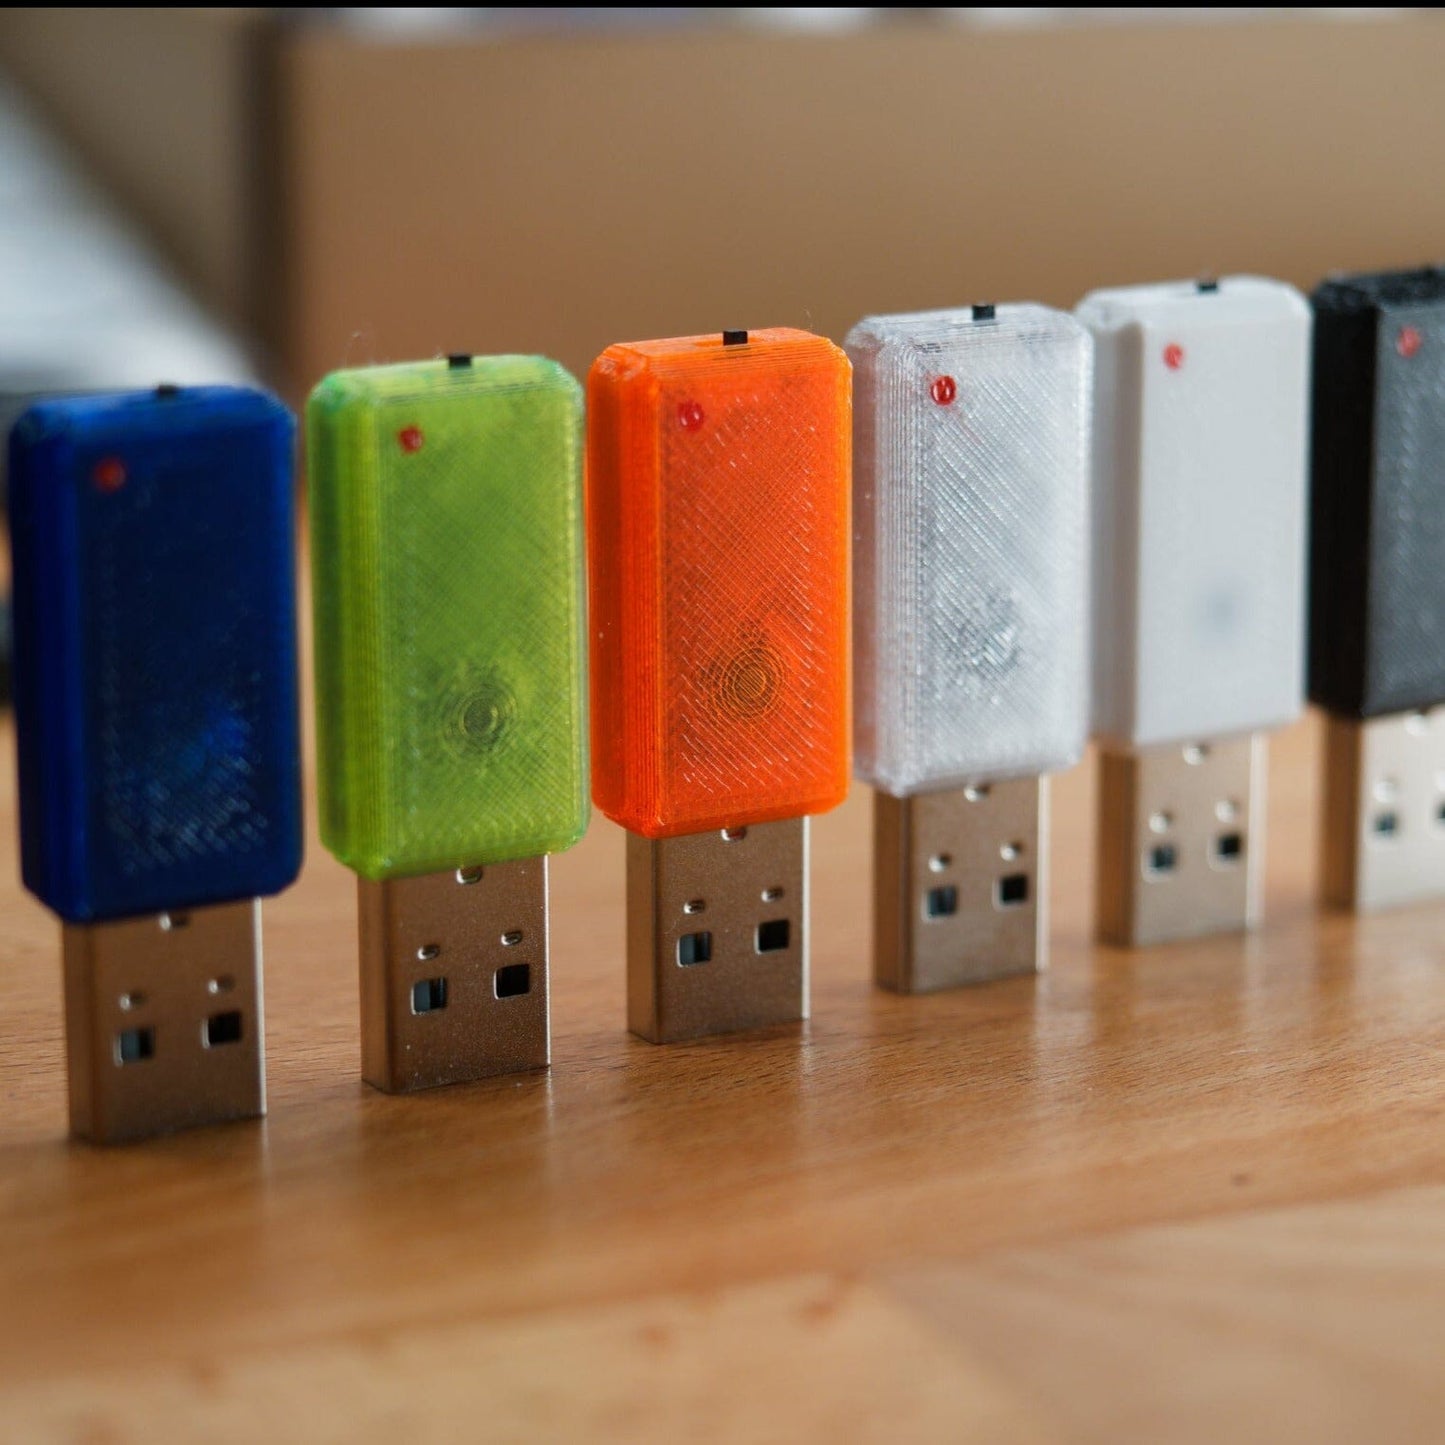 USB Novas with 6 different colored cases. In blue, green, orange, transparent, white, black.